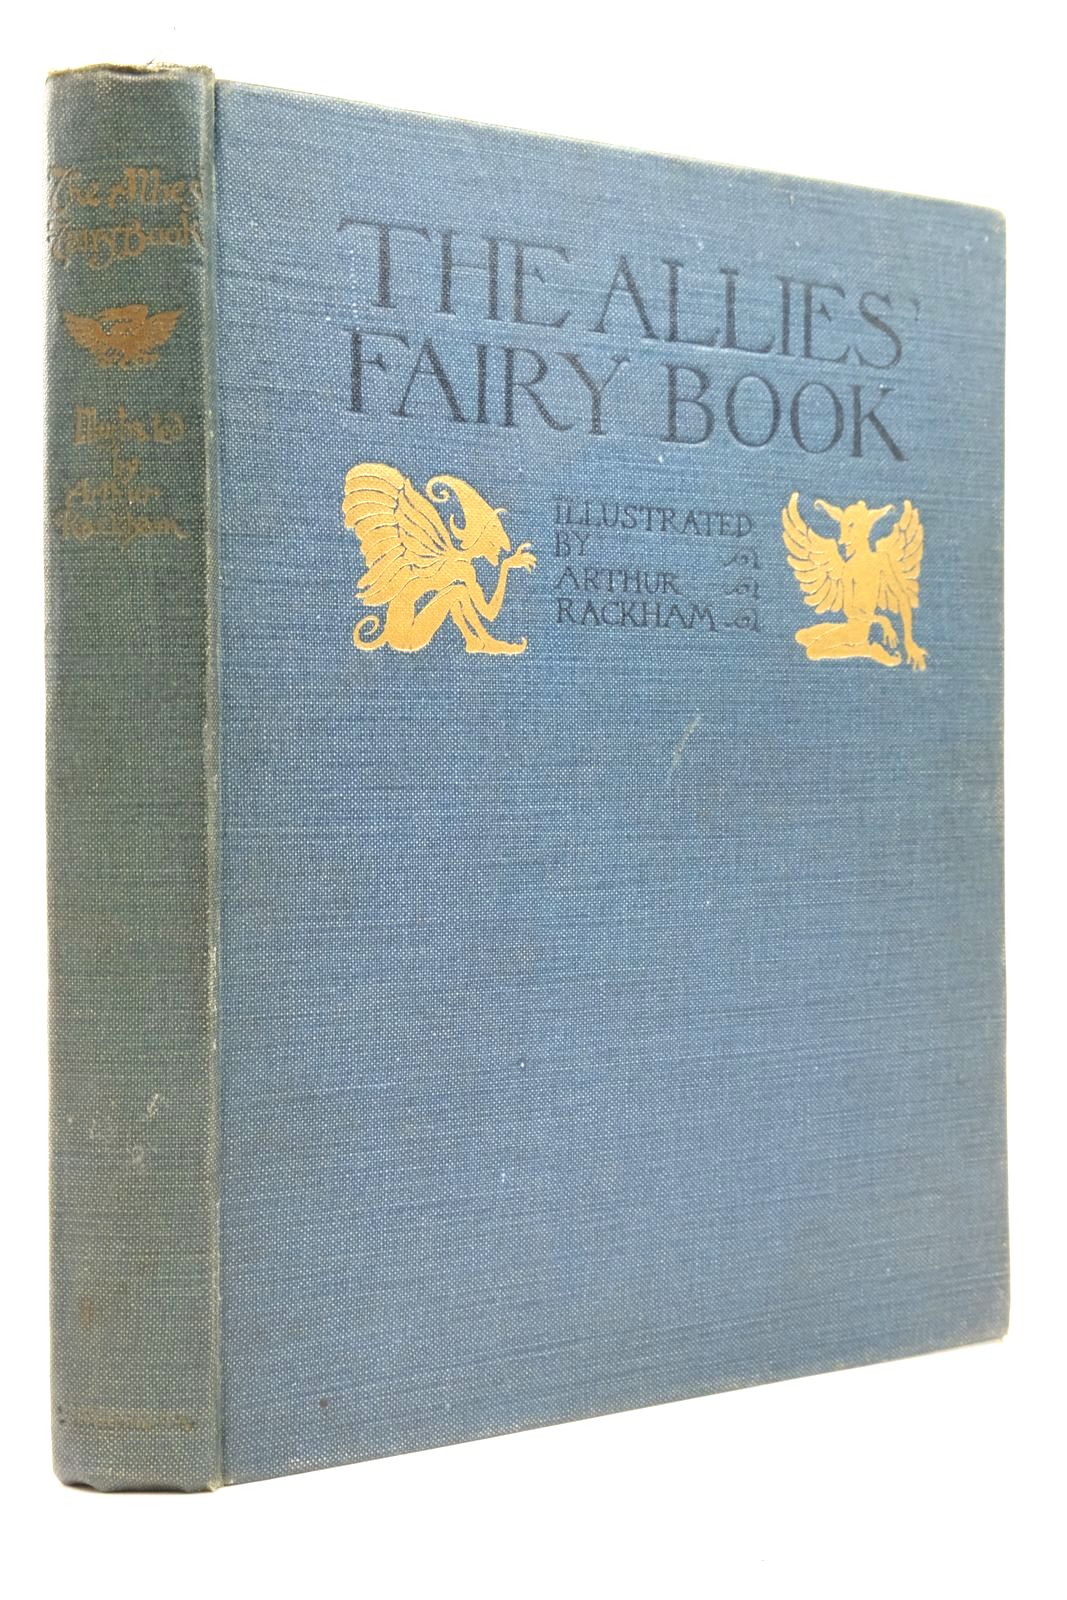 Photo of THE ALLIES' FAIRY BOOK- Stock Number: 2138091